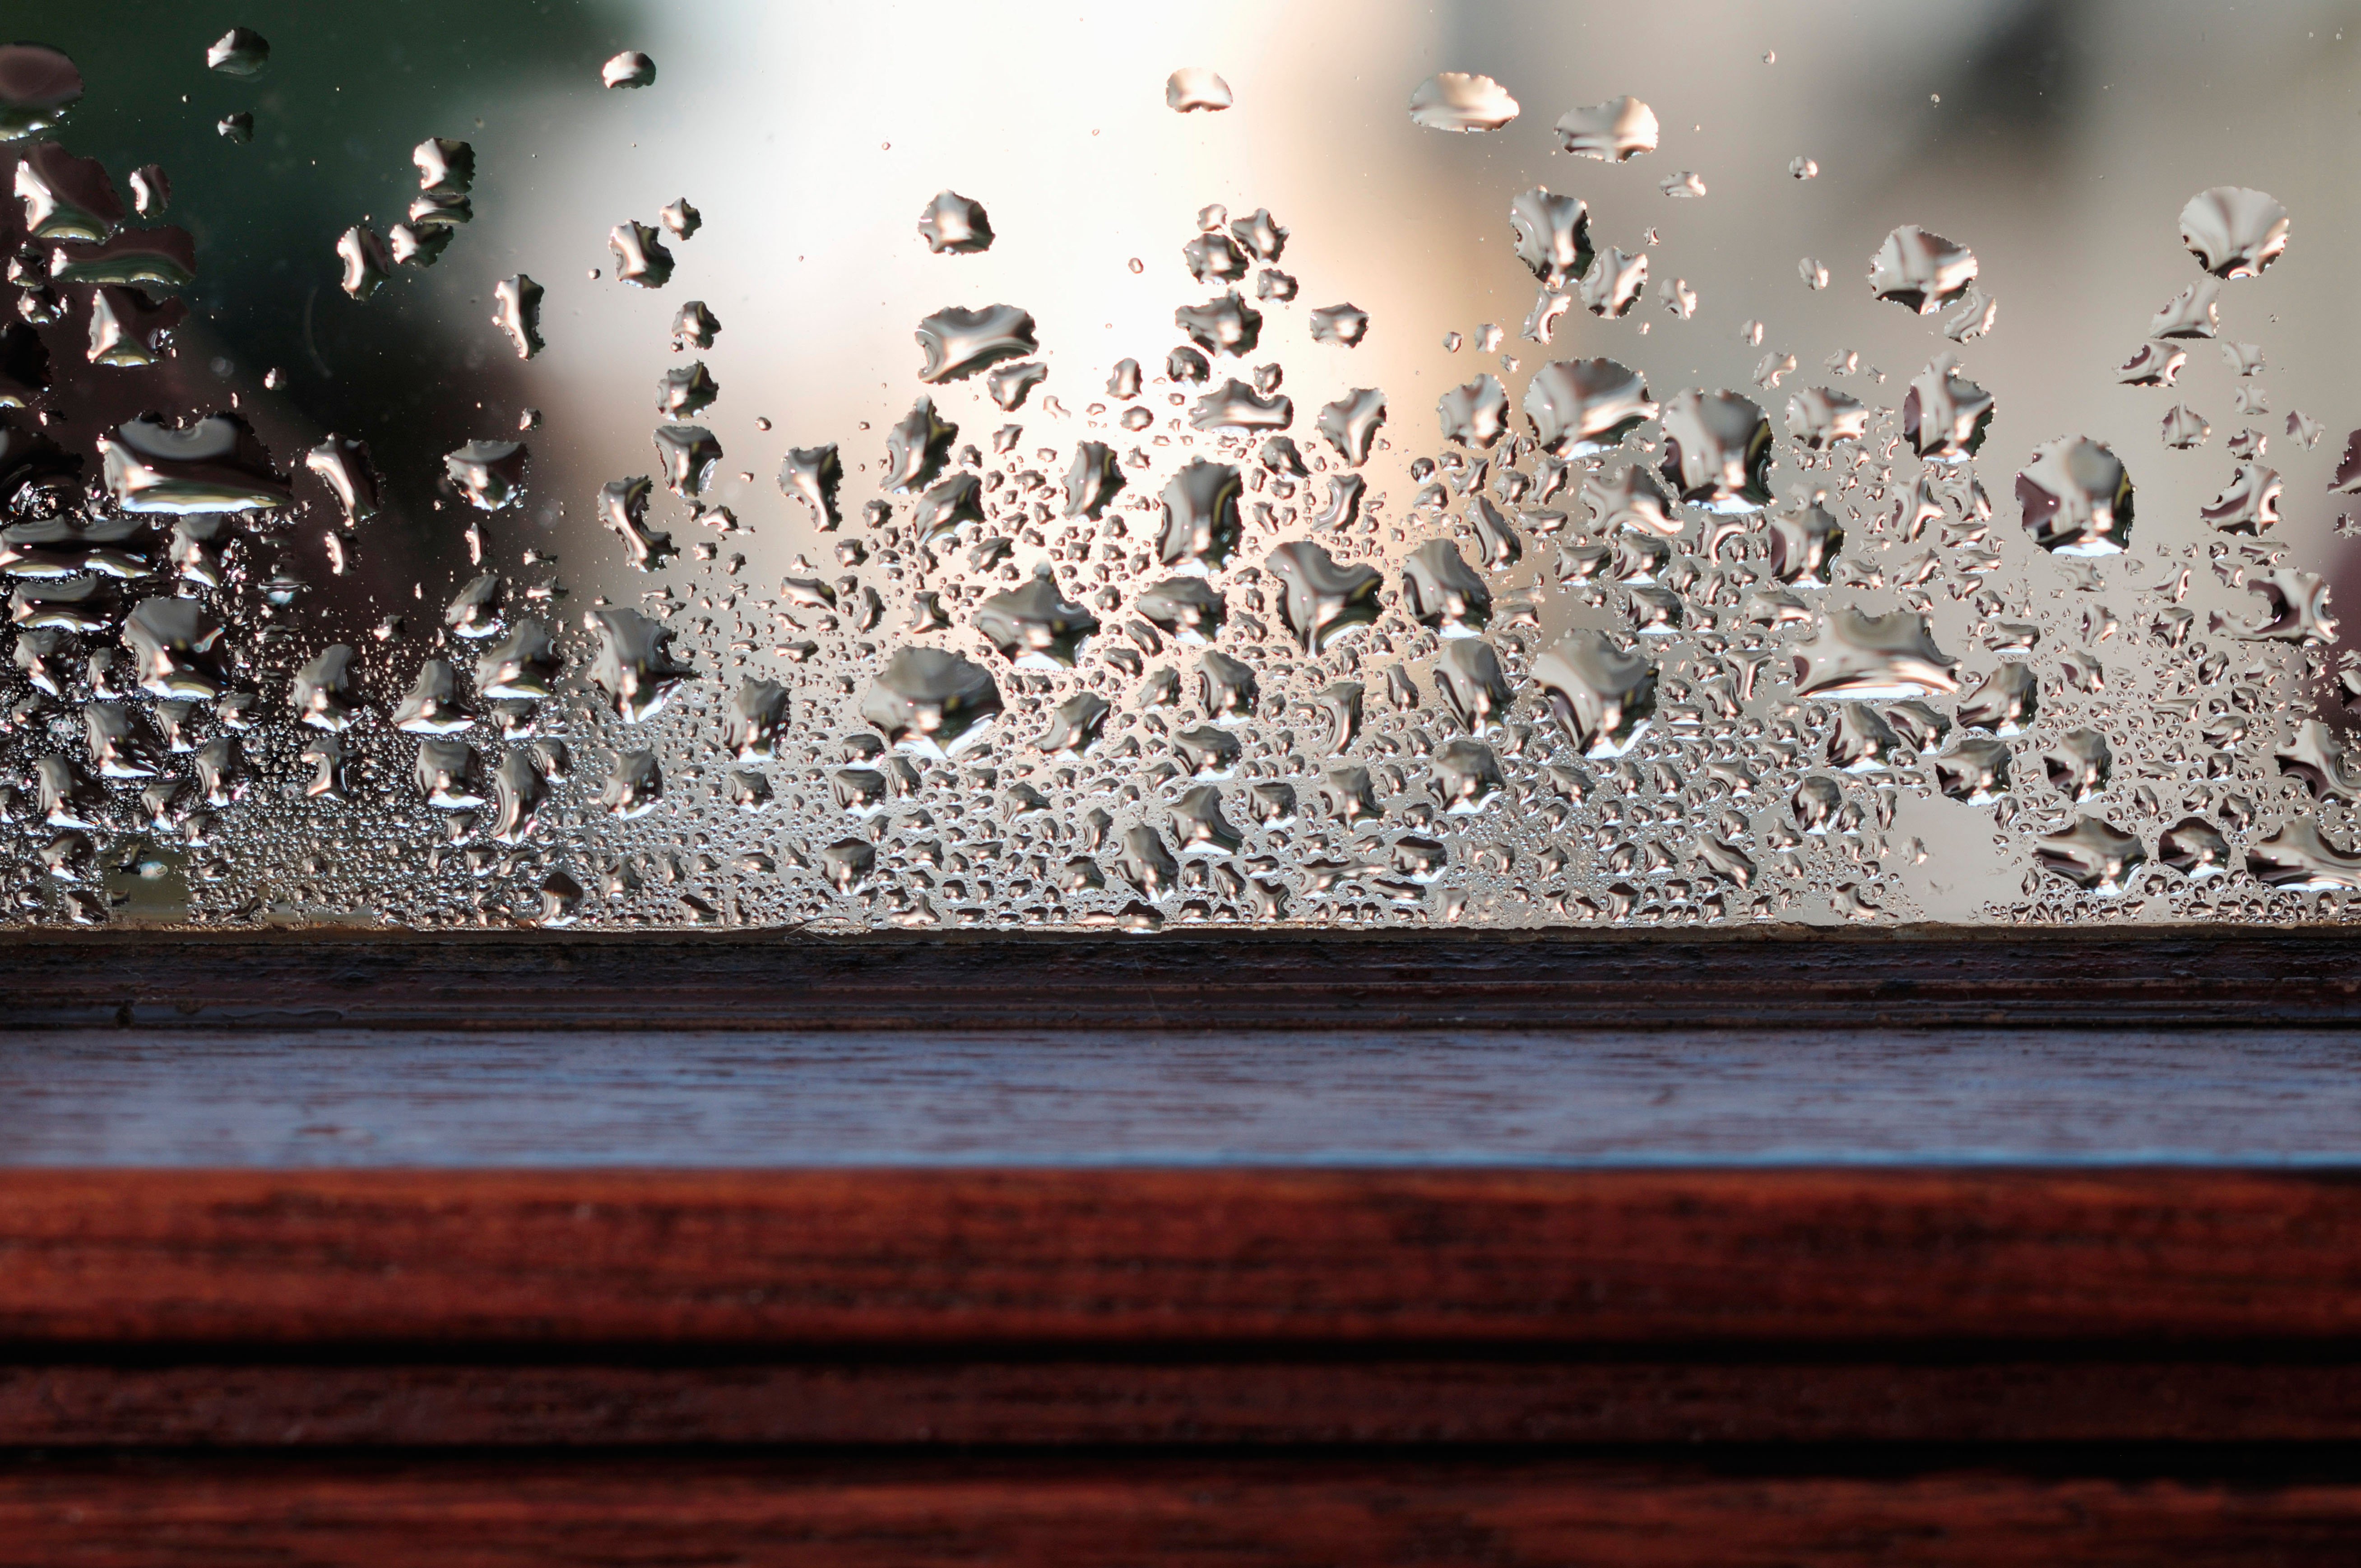 How to Stop Condensation on Windows, Causes & Effects